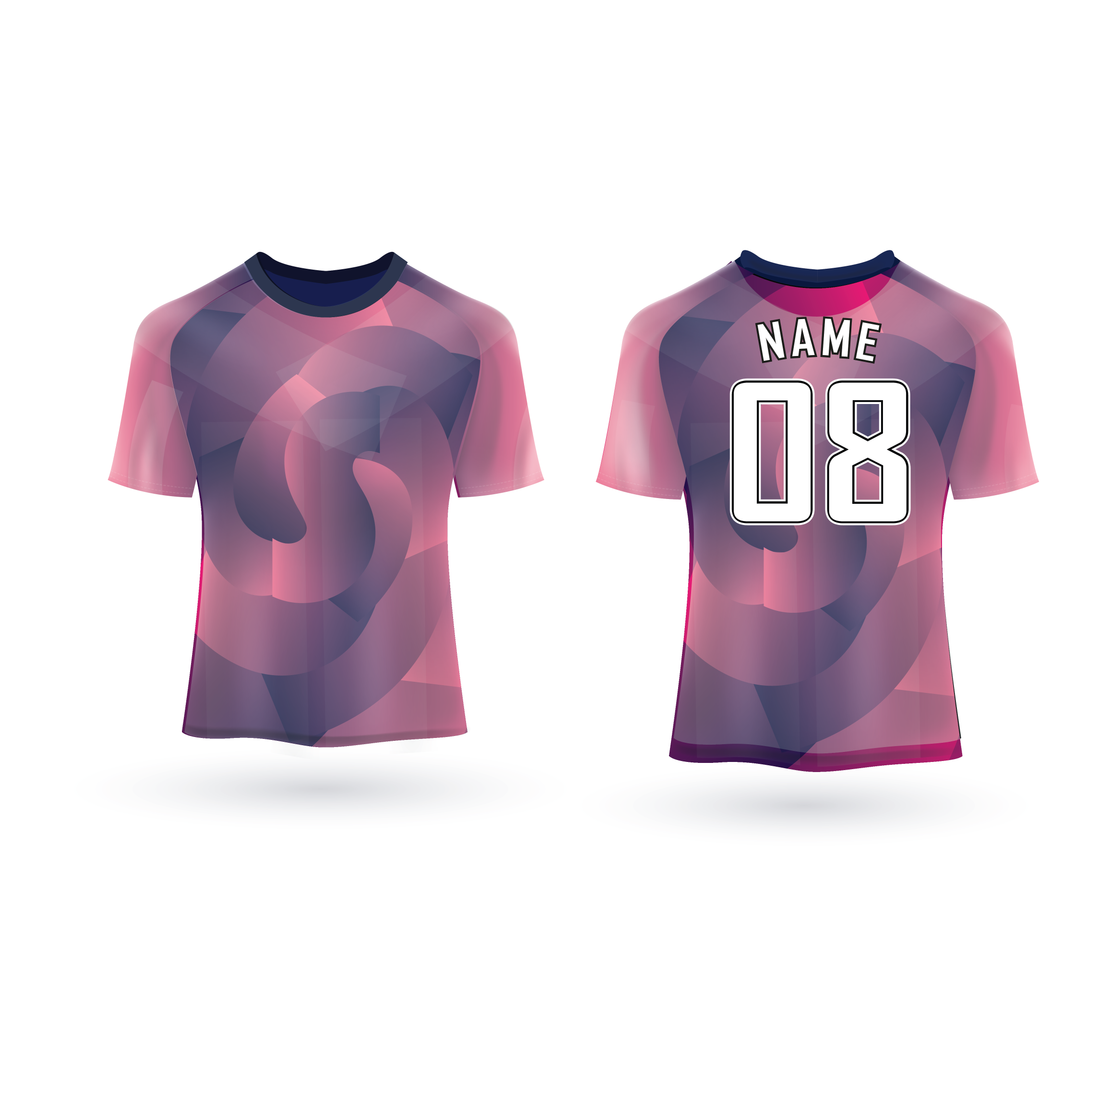 NEXT PRINT All Over Printed Customized Sublimation T-Shirt Unisex Sports Jersey Player Name & Number, Team Name NP50000280